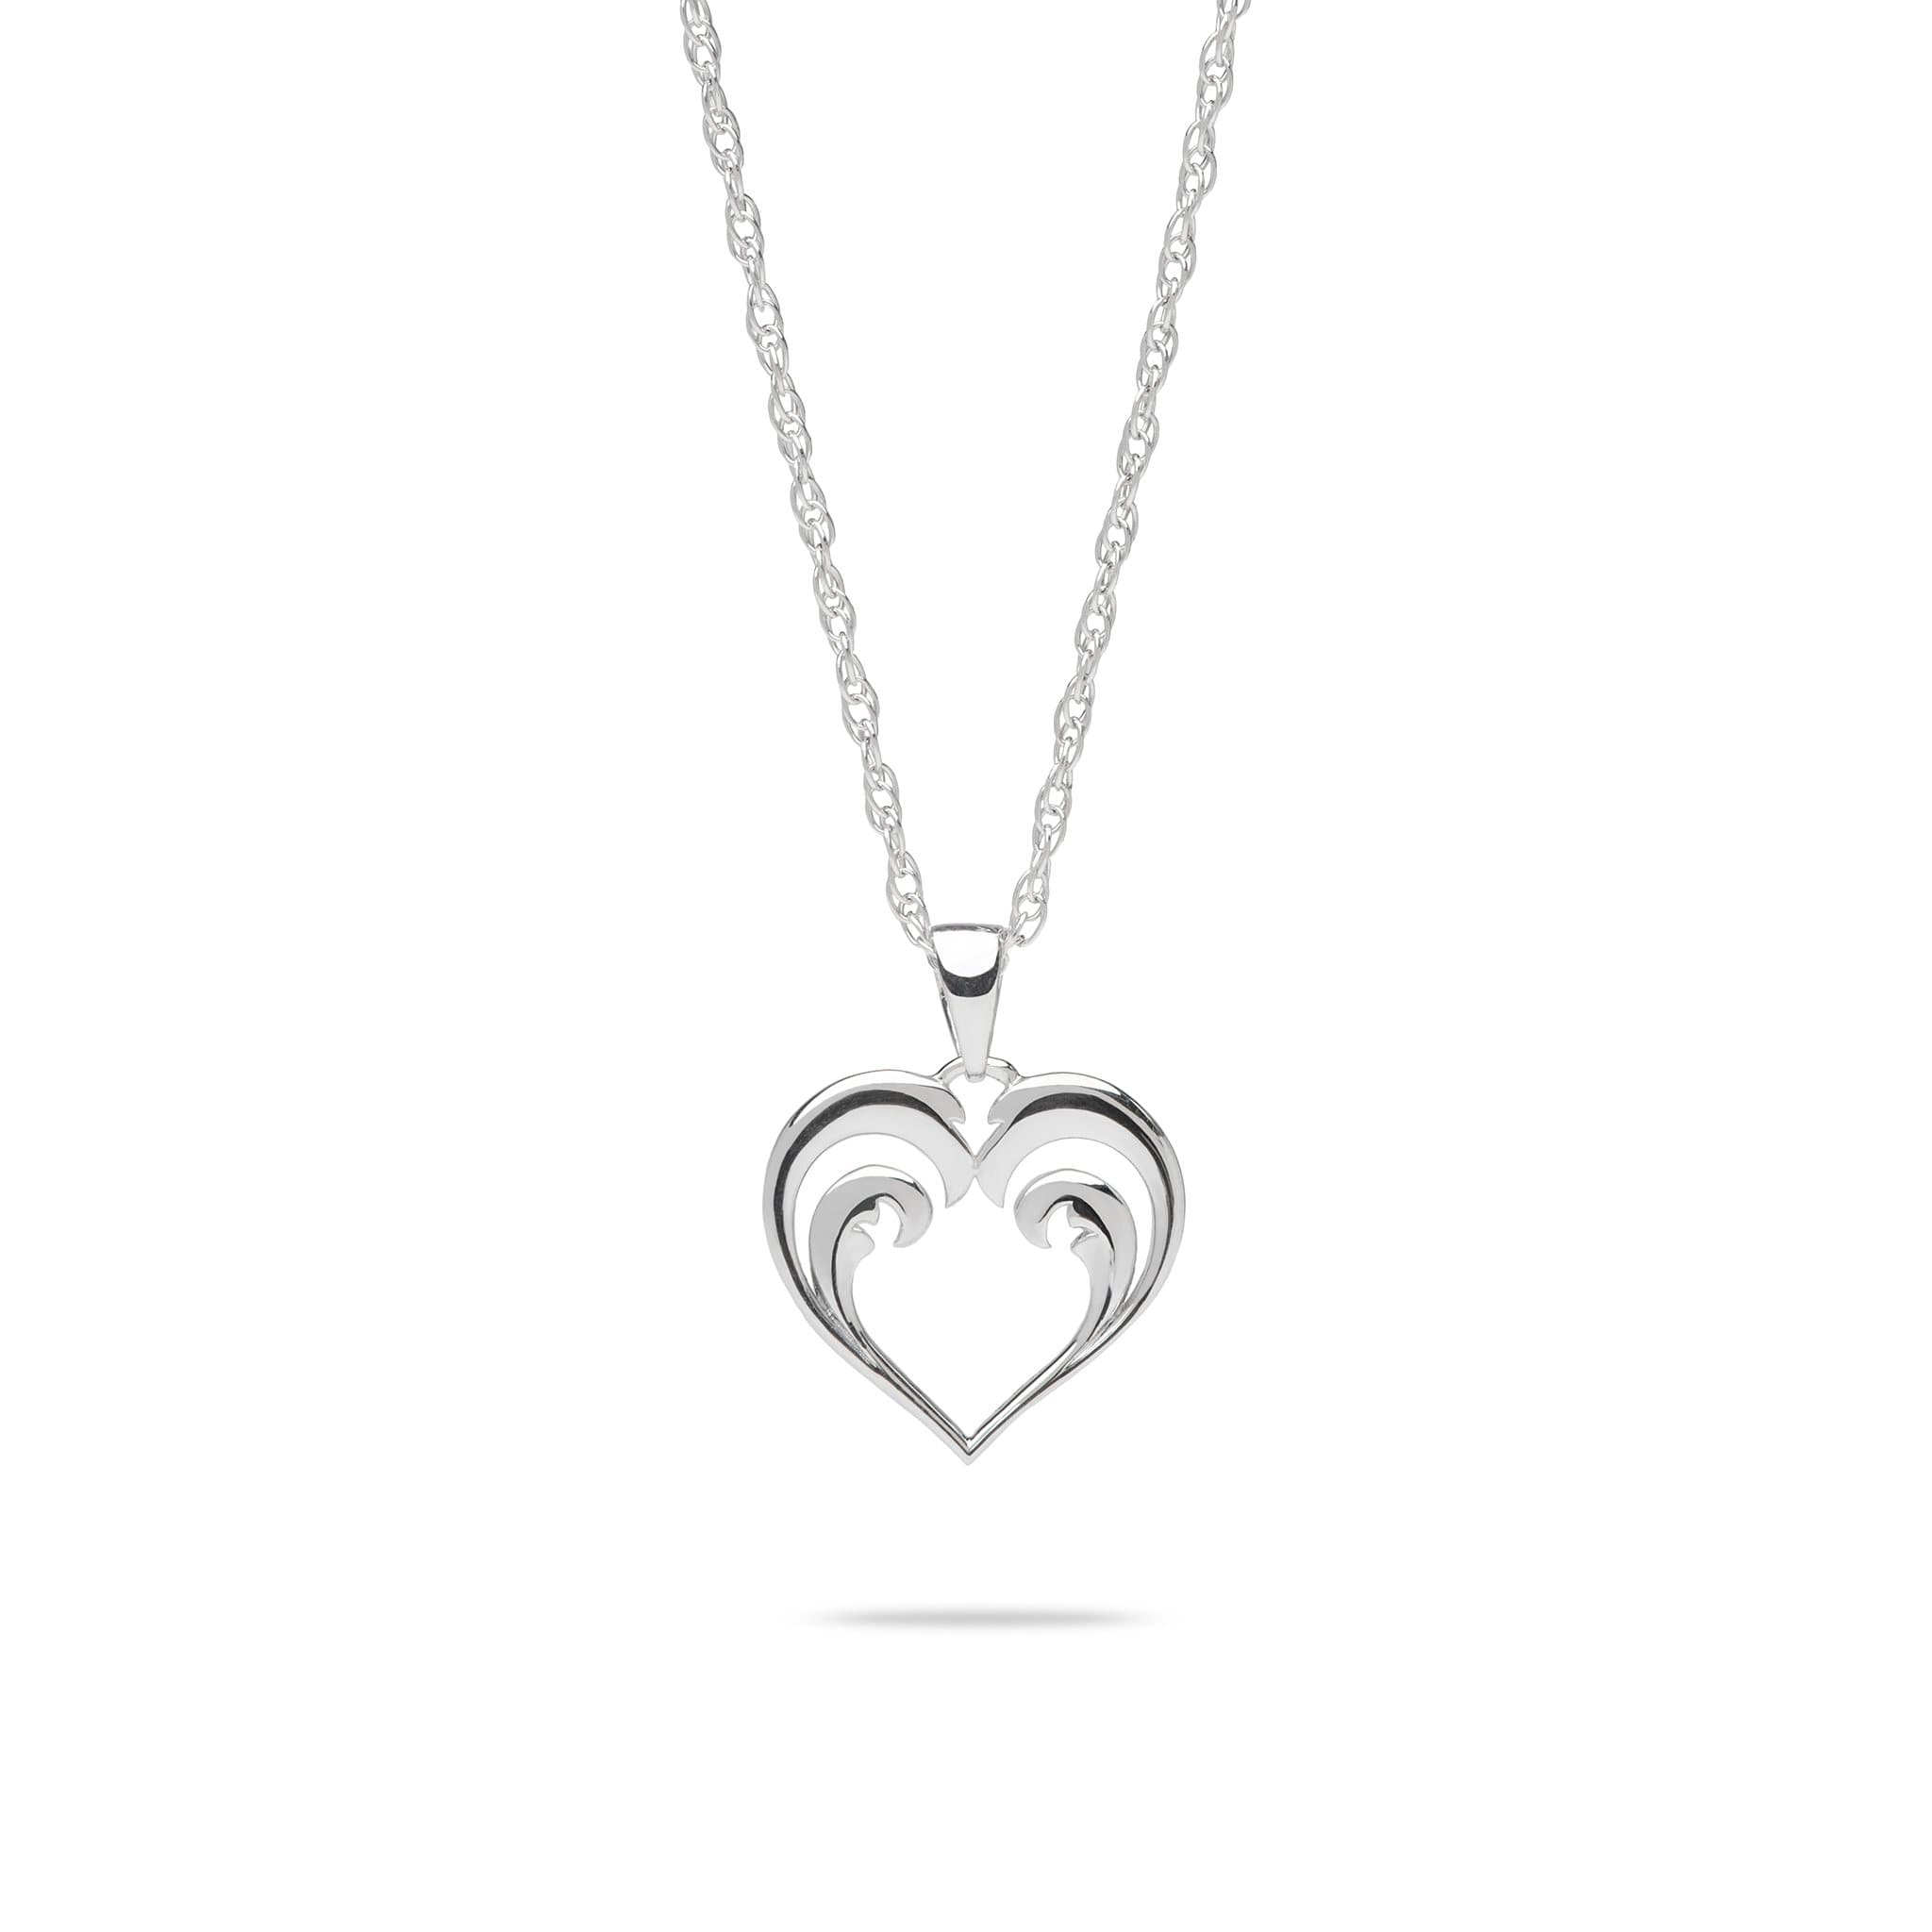 18" Nalu Heart Pendant with Chain in Sterling Silver - 15mm - Maui Divers Jewelry